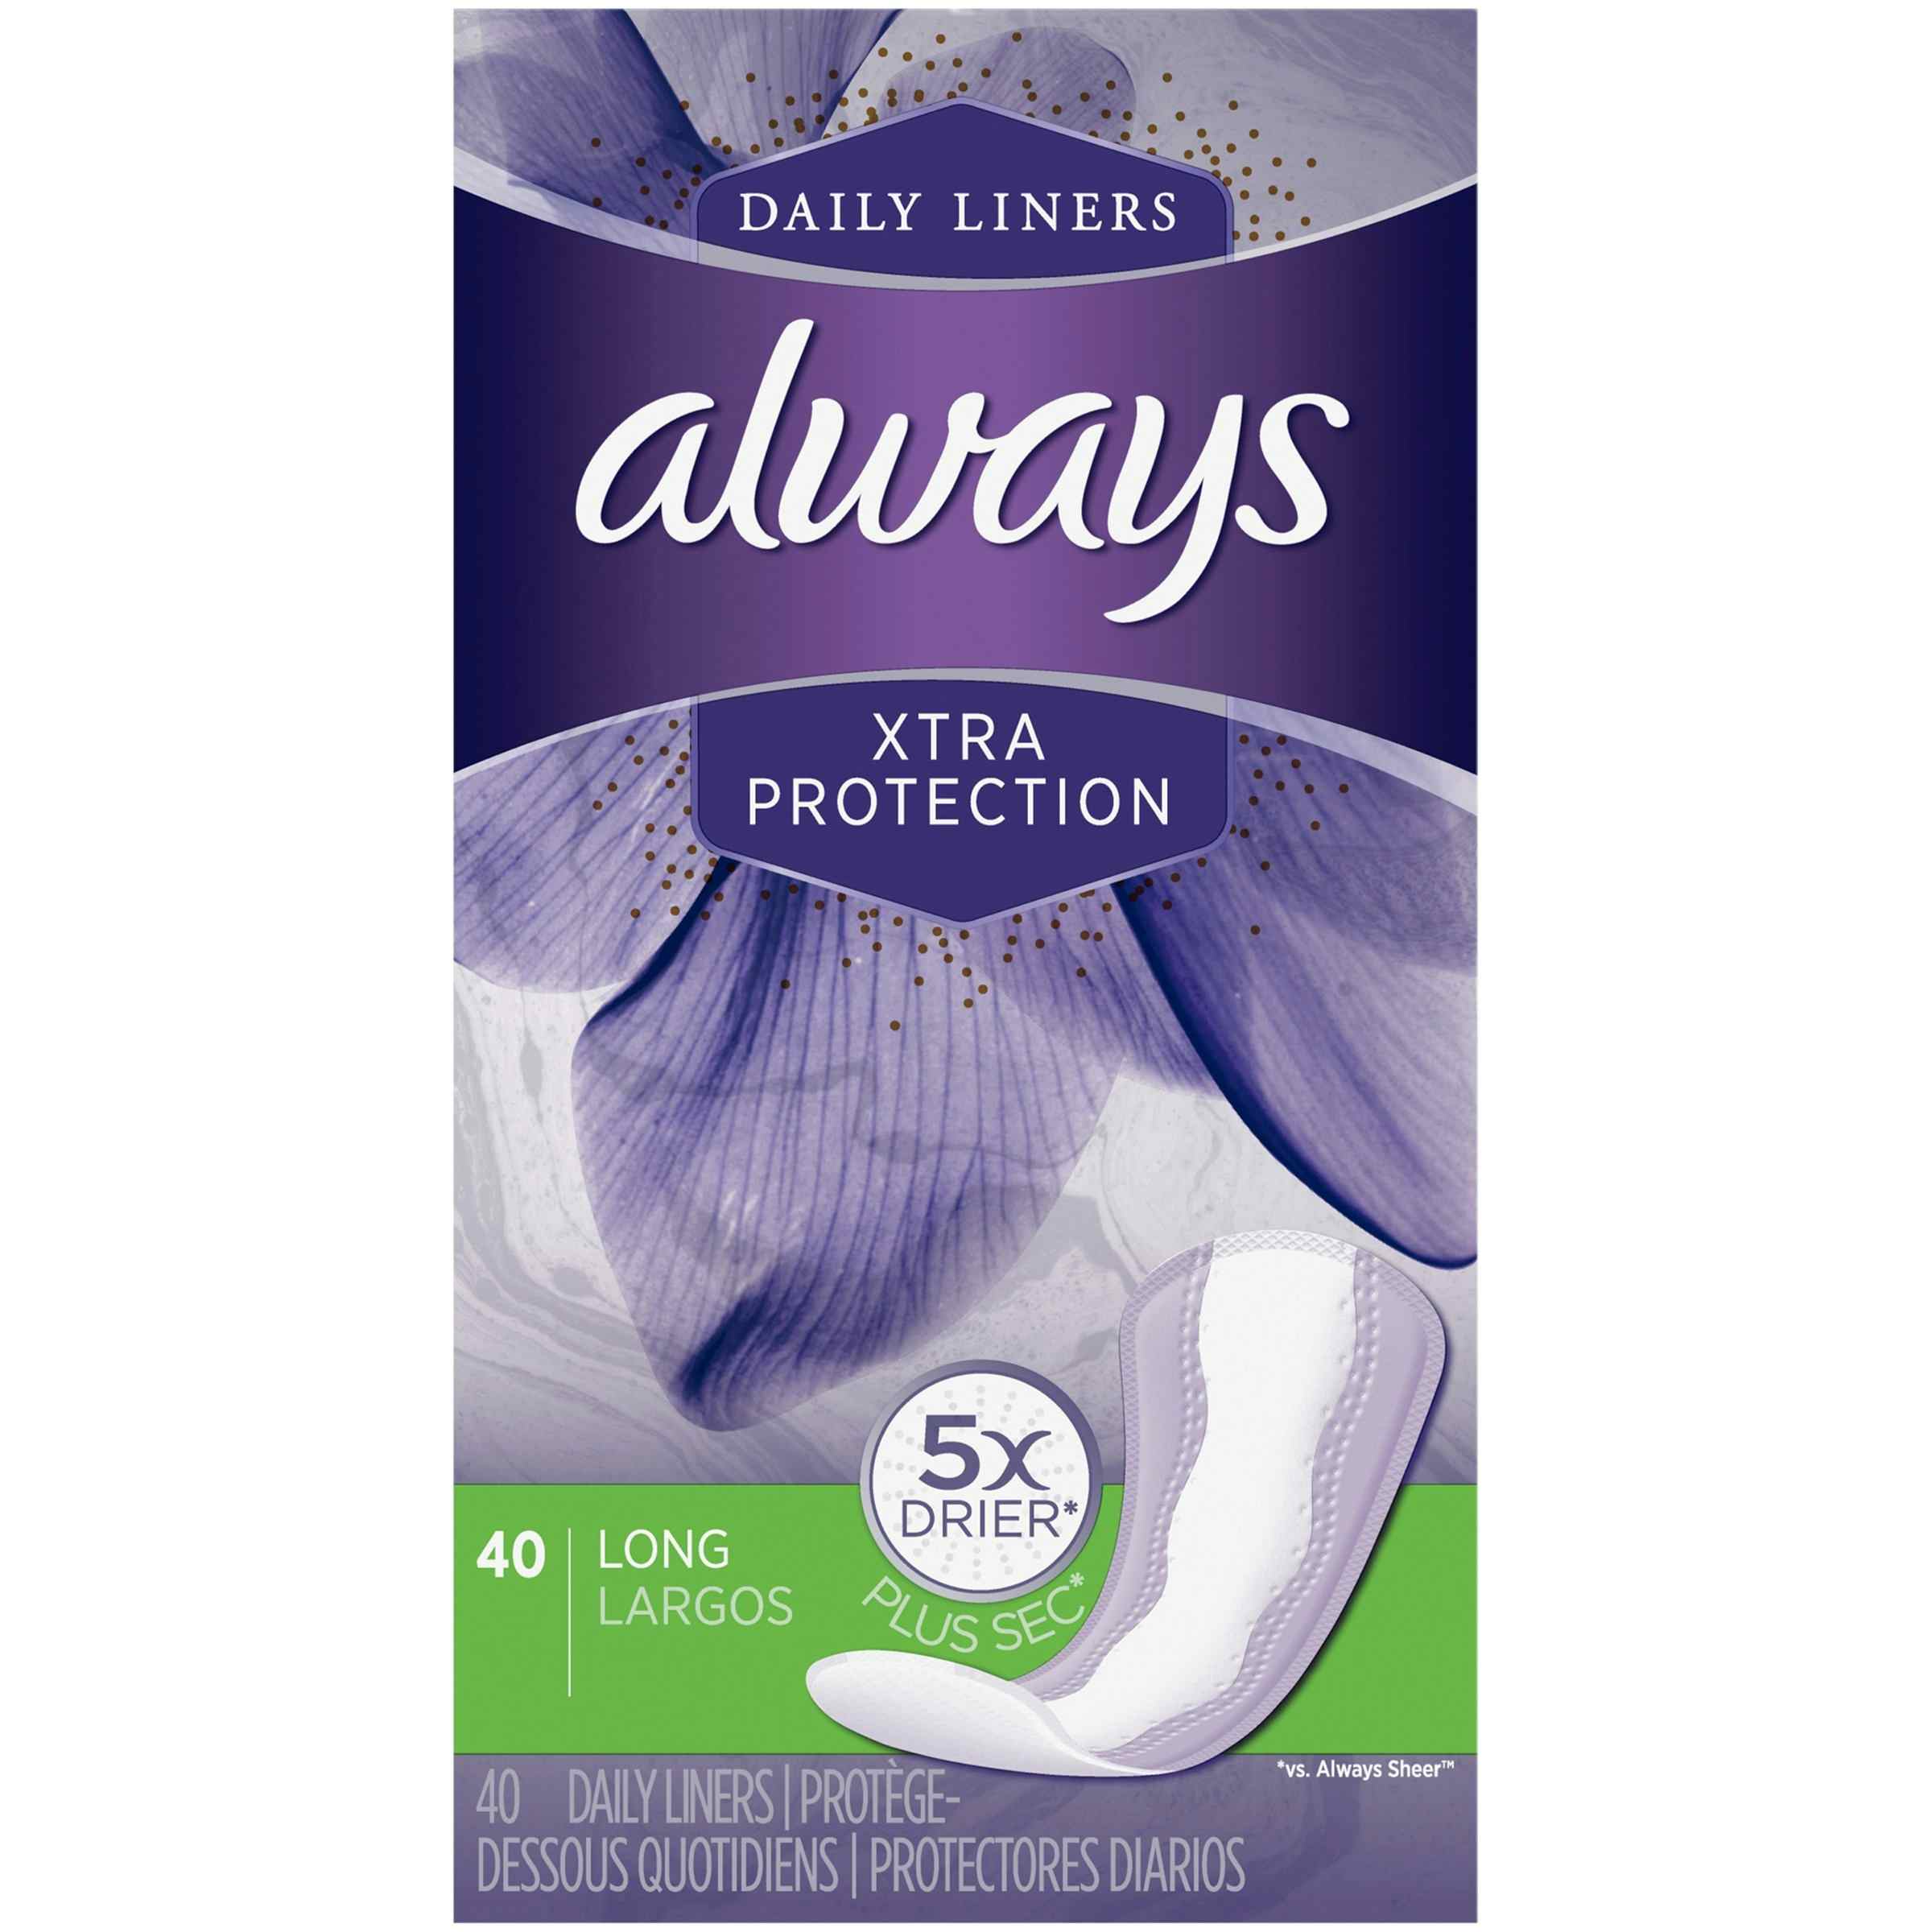 Always Xtra Protection Daily Liners, 03700045581, Case of 480 (12 Boxes)